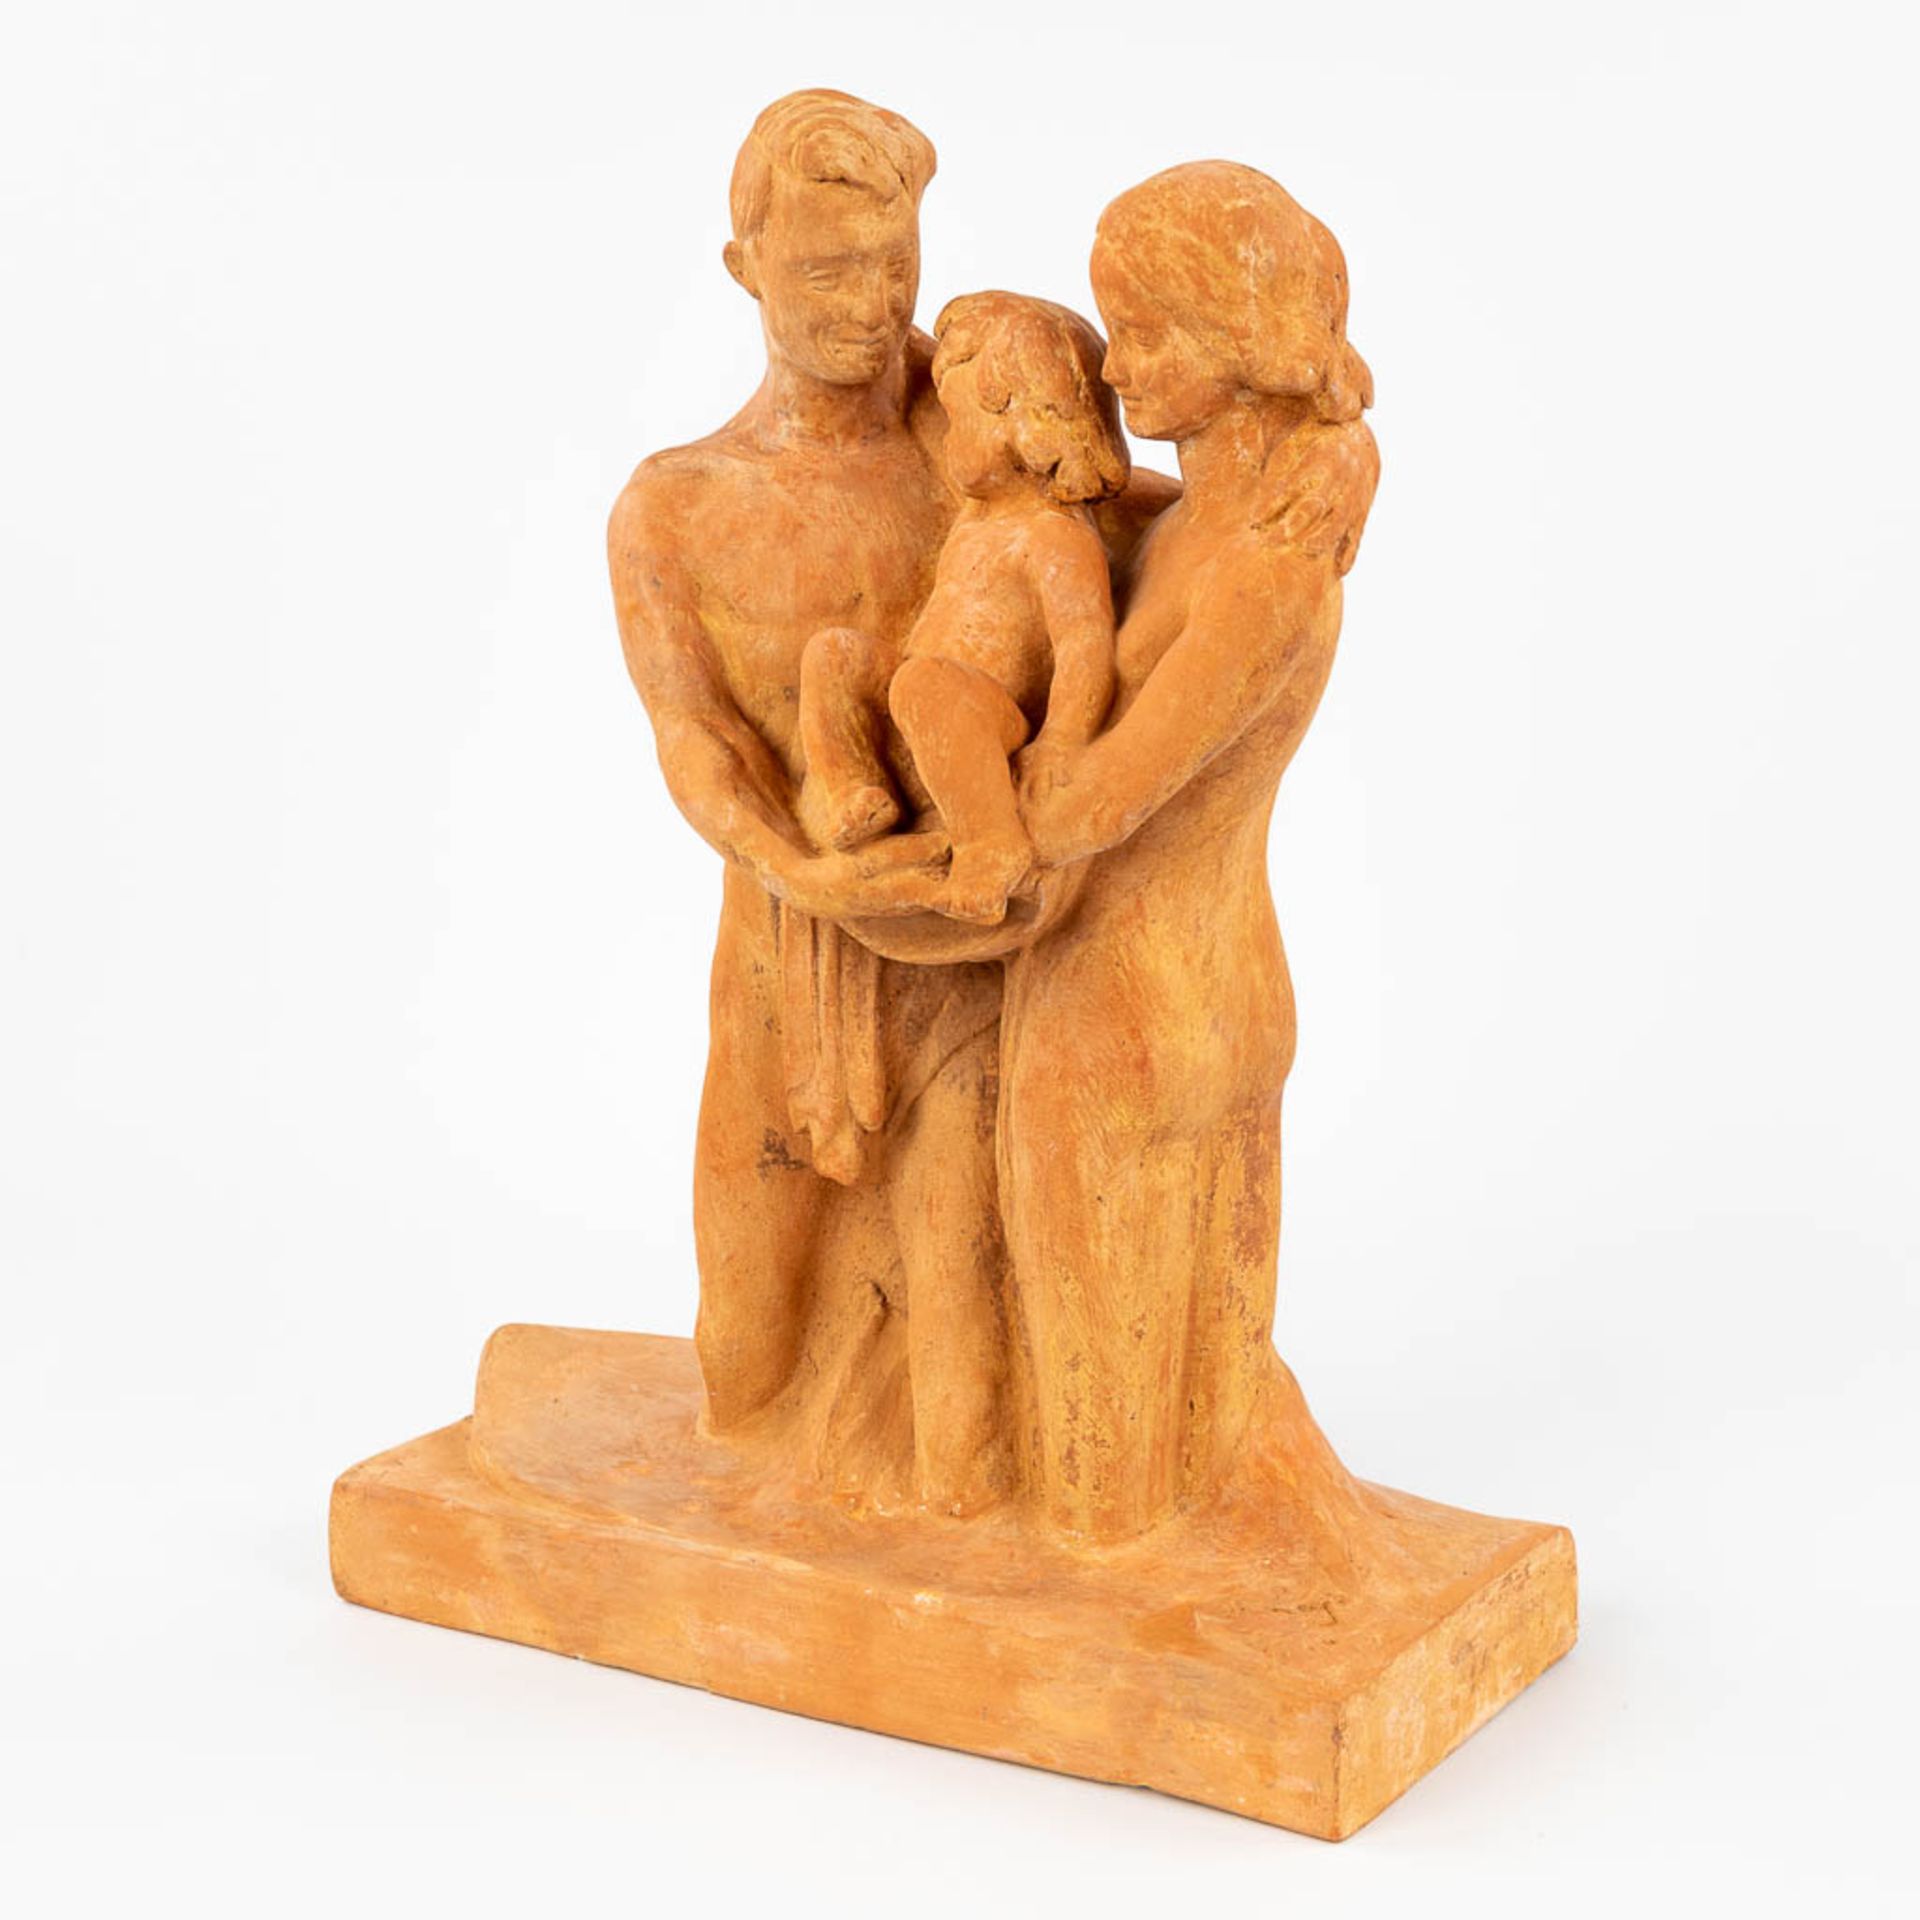 Achille LEYS (1873-1953) 'Family' a statue made of terracotta.Ê1946. (16 x 34 x 44cm) - Image 5 of 11